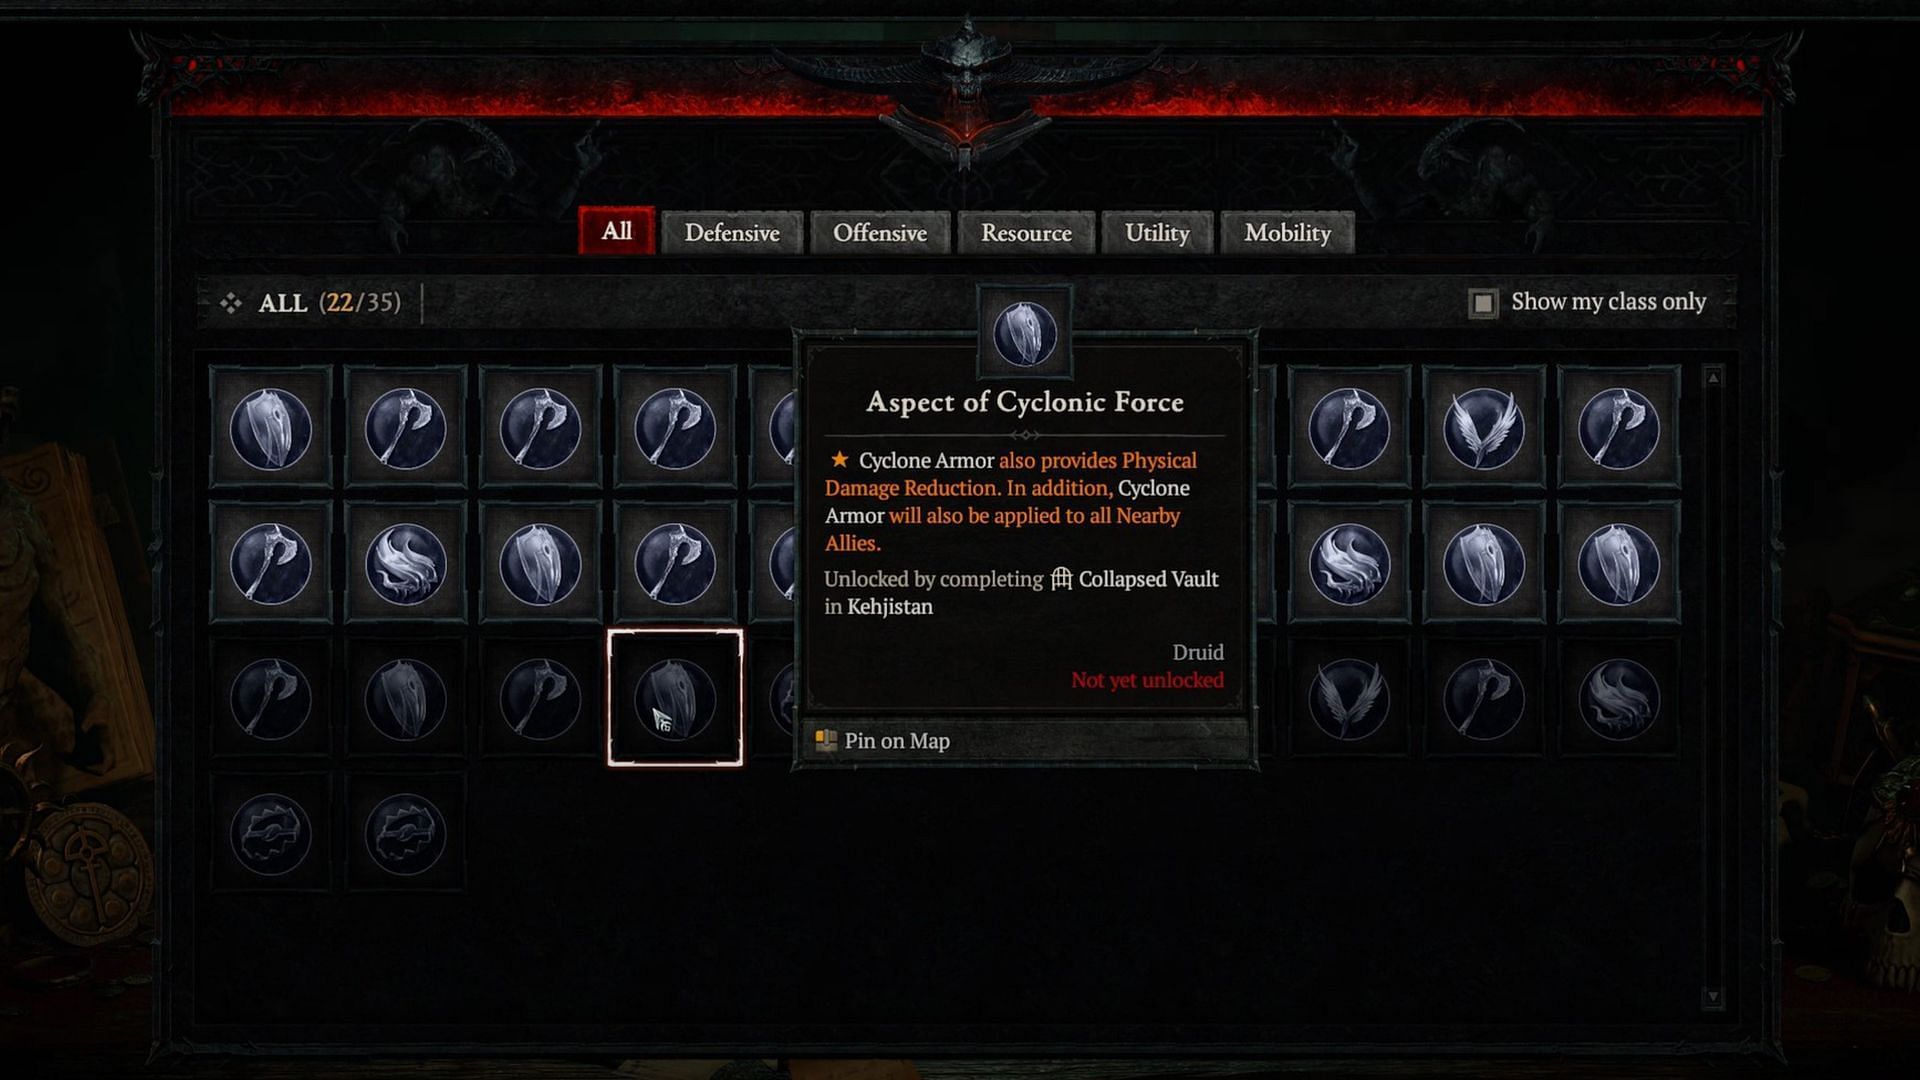 The Aspect of Cyclonic Force in Diablo 4 (Image via Blizzard Entertainment)